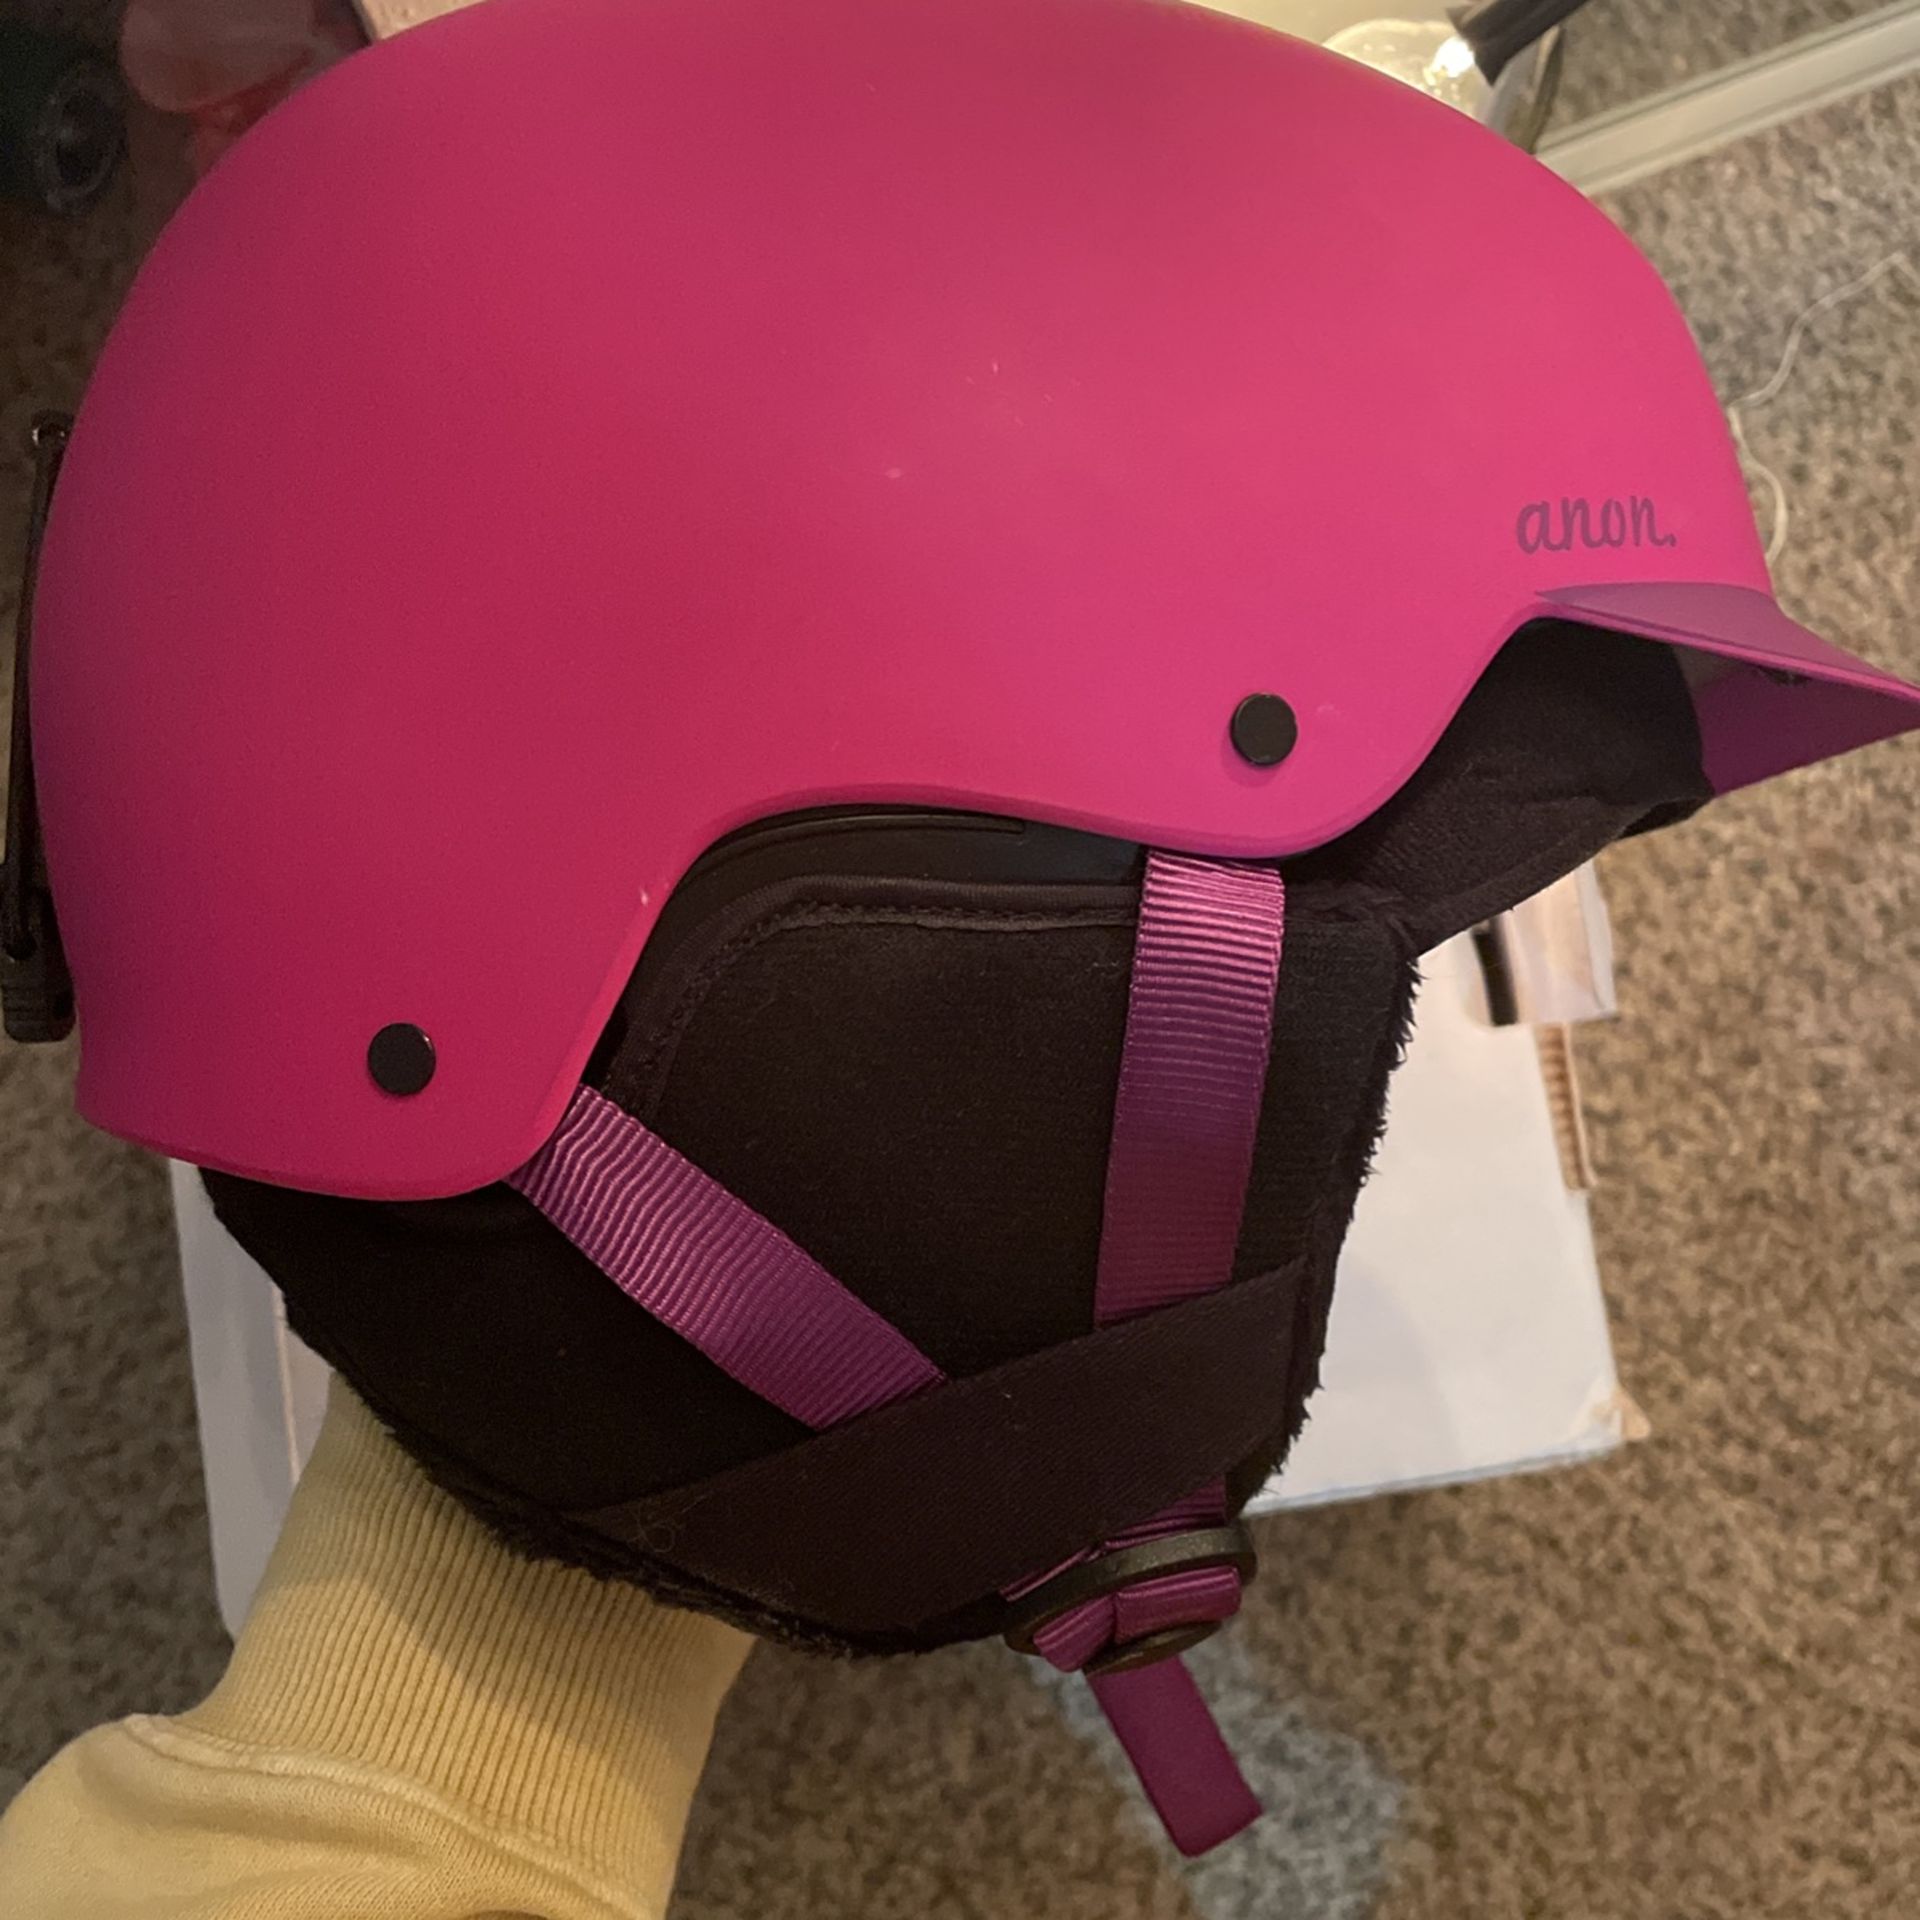 Burton Anon Aera Matte Pink Purple Snowboarding Helmet Padded Faux Fur Soft With Visor And Go Pro Mount And Box